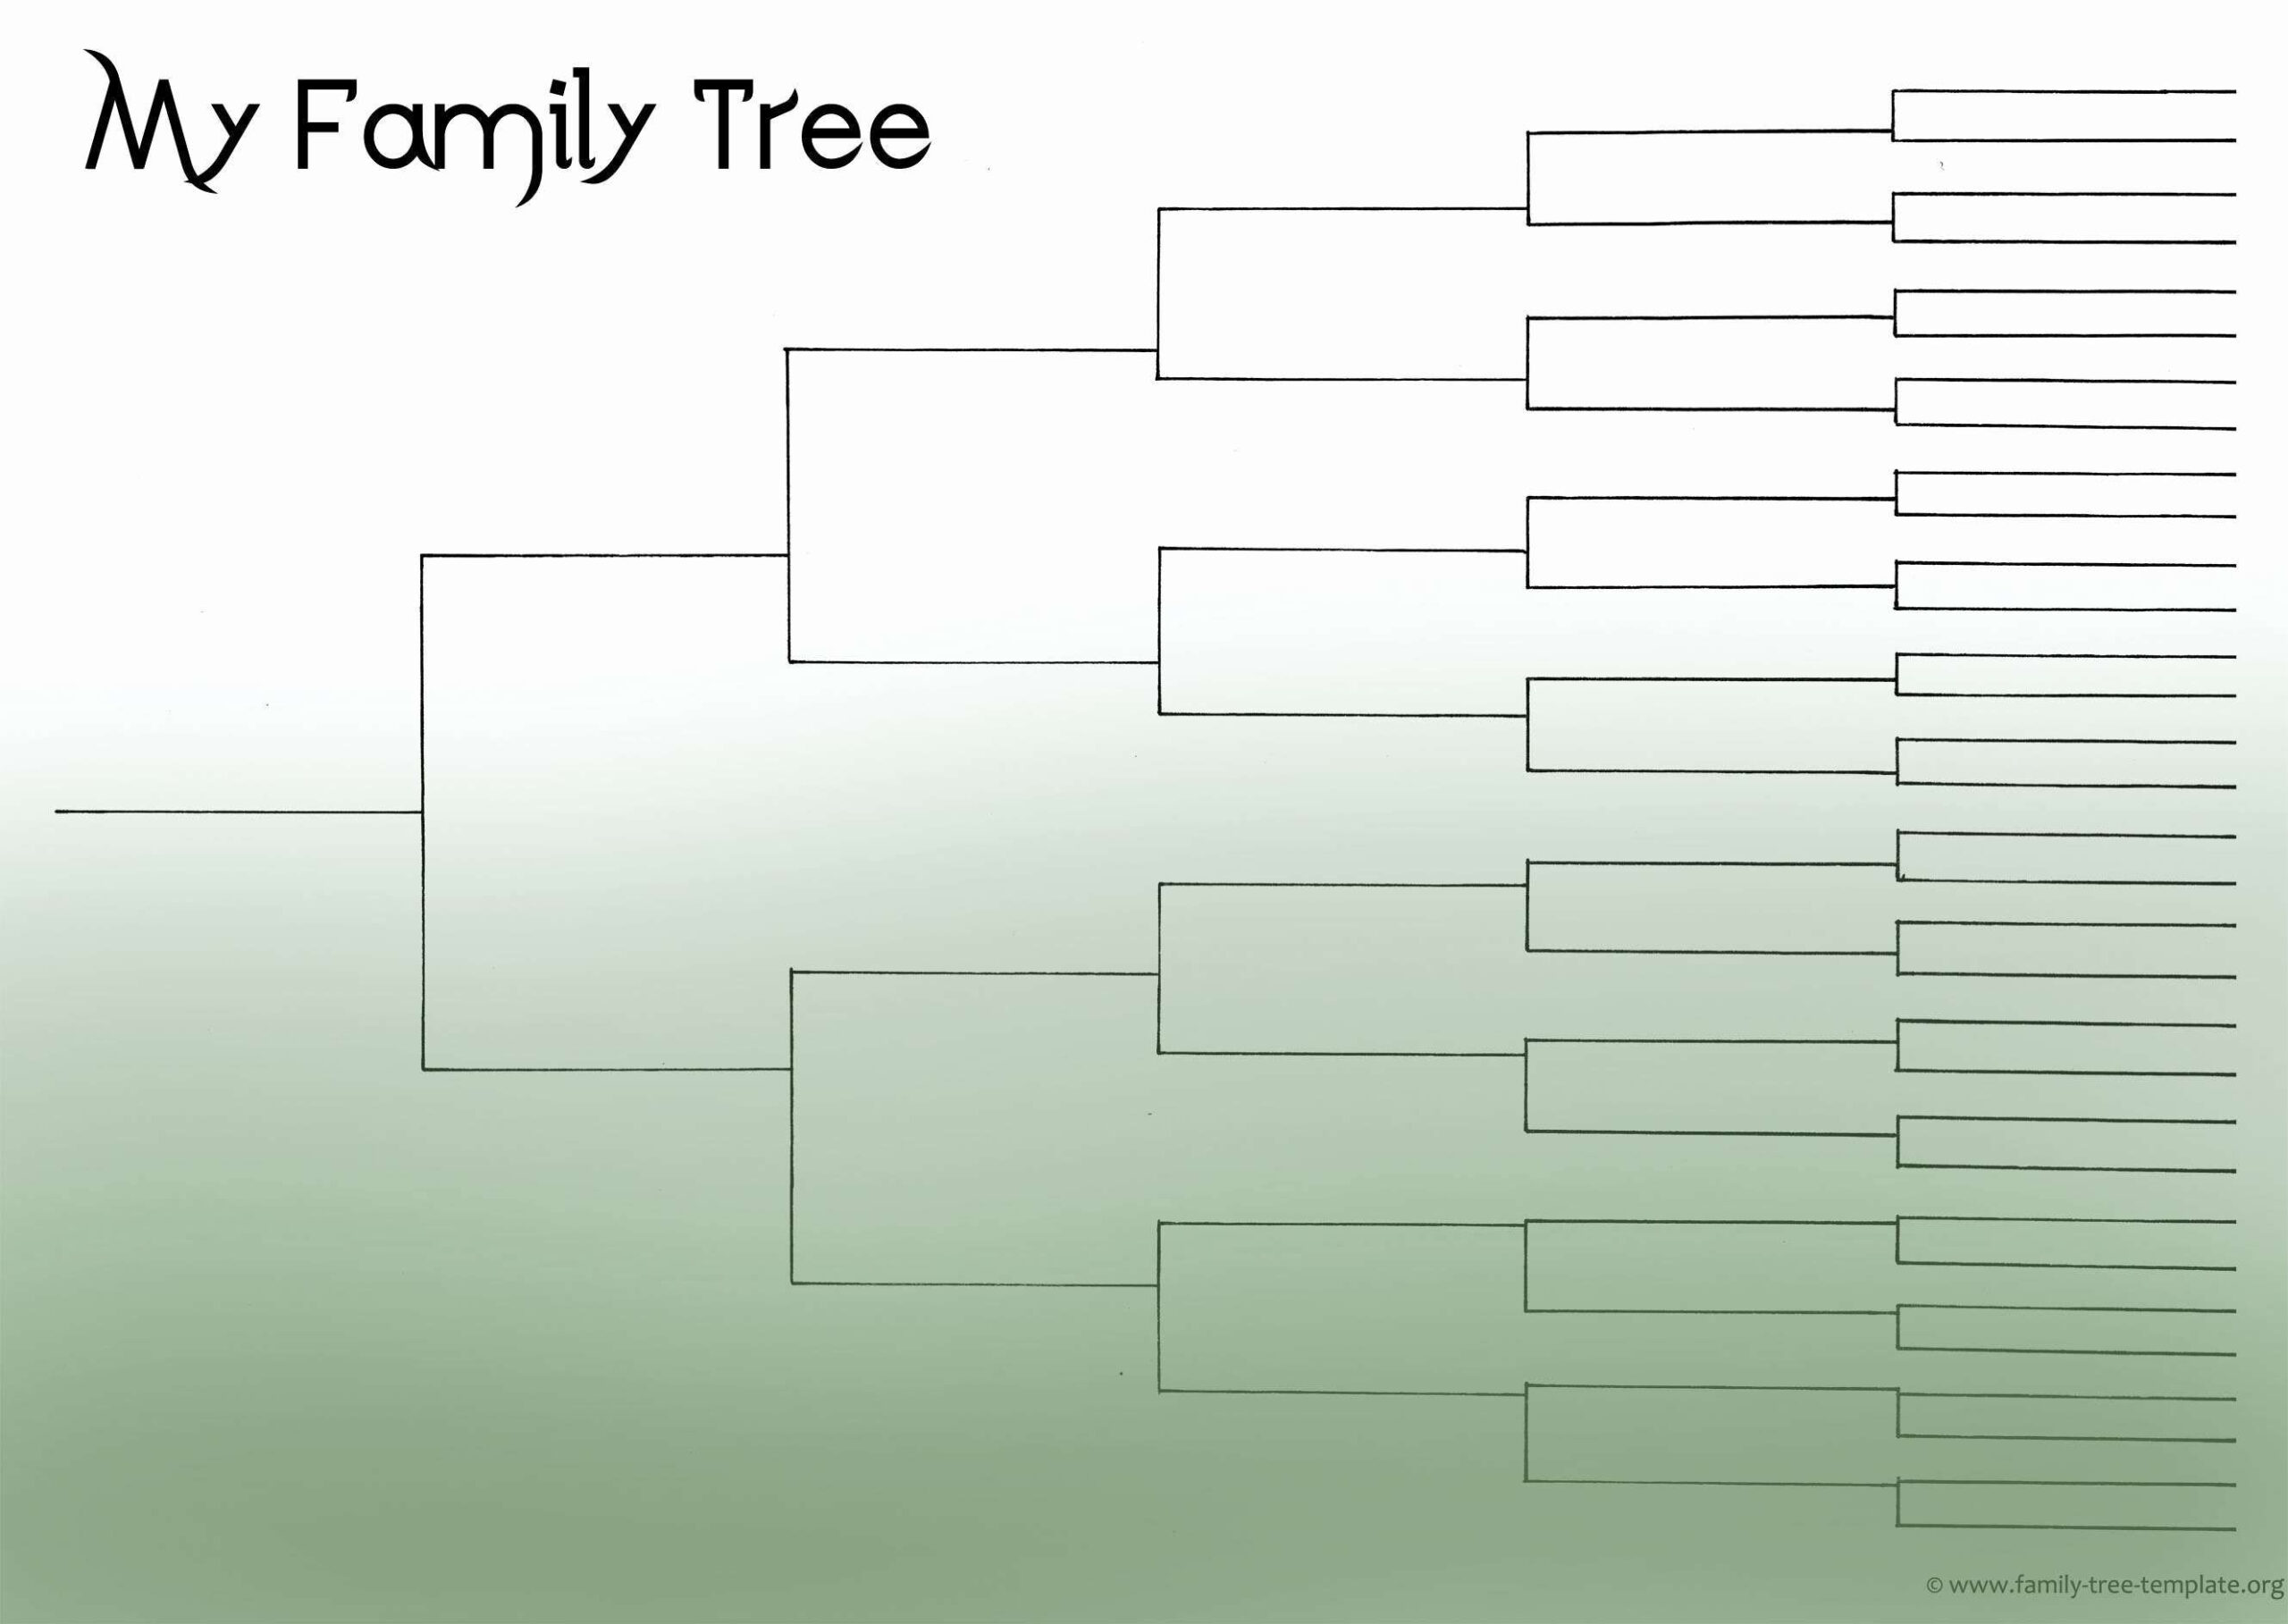 10 Generation Family Tree Template Excel Collection